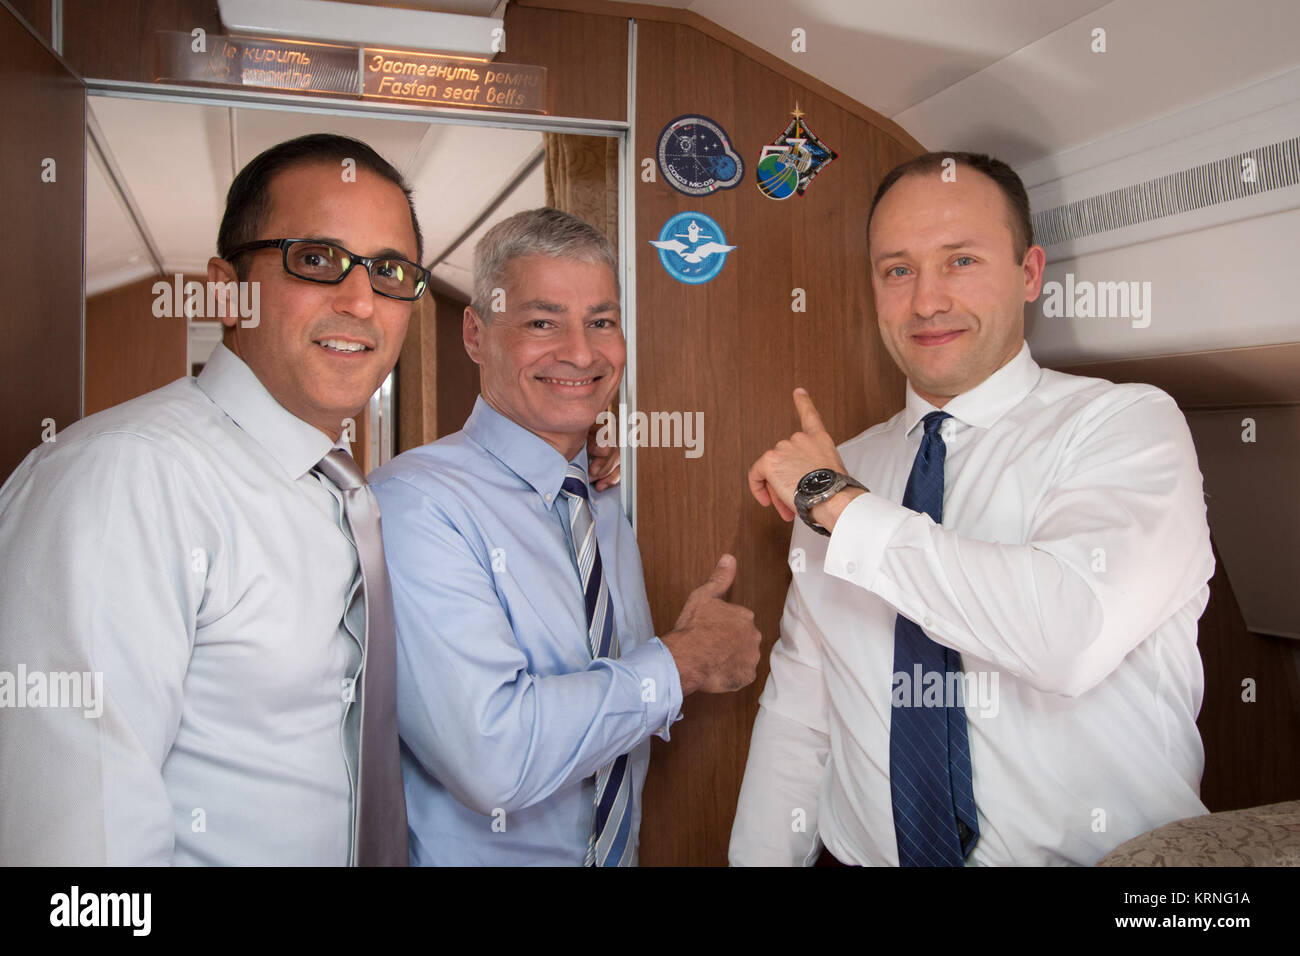 Aboard the Gagarin Cosmonaut Training Center Aircraft en route from their training base to their launch site at the Baikonur Cosmodrome in Kazakhstan for final pre-launch training, Expedition 53-54 crewmembers Joe Acaba (left) and Mark Vande Hei (center) of NASA and Alexander Misurkin of Roscosmos (right) point to the stickers bearing their mission insignias Sept. 6. They will launch Sept. 13 on the Soyuz MS-06 spacecraft from the Baikonur Cosmodrome for a five and a half month mission on the International Space Station.  NASA/Victor Zelentsov Soyuz MS-06 crew aboard a Russian Federal Space Ag Stock Photo